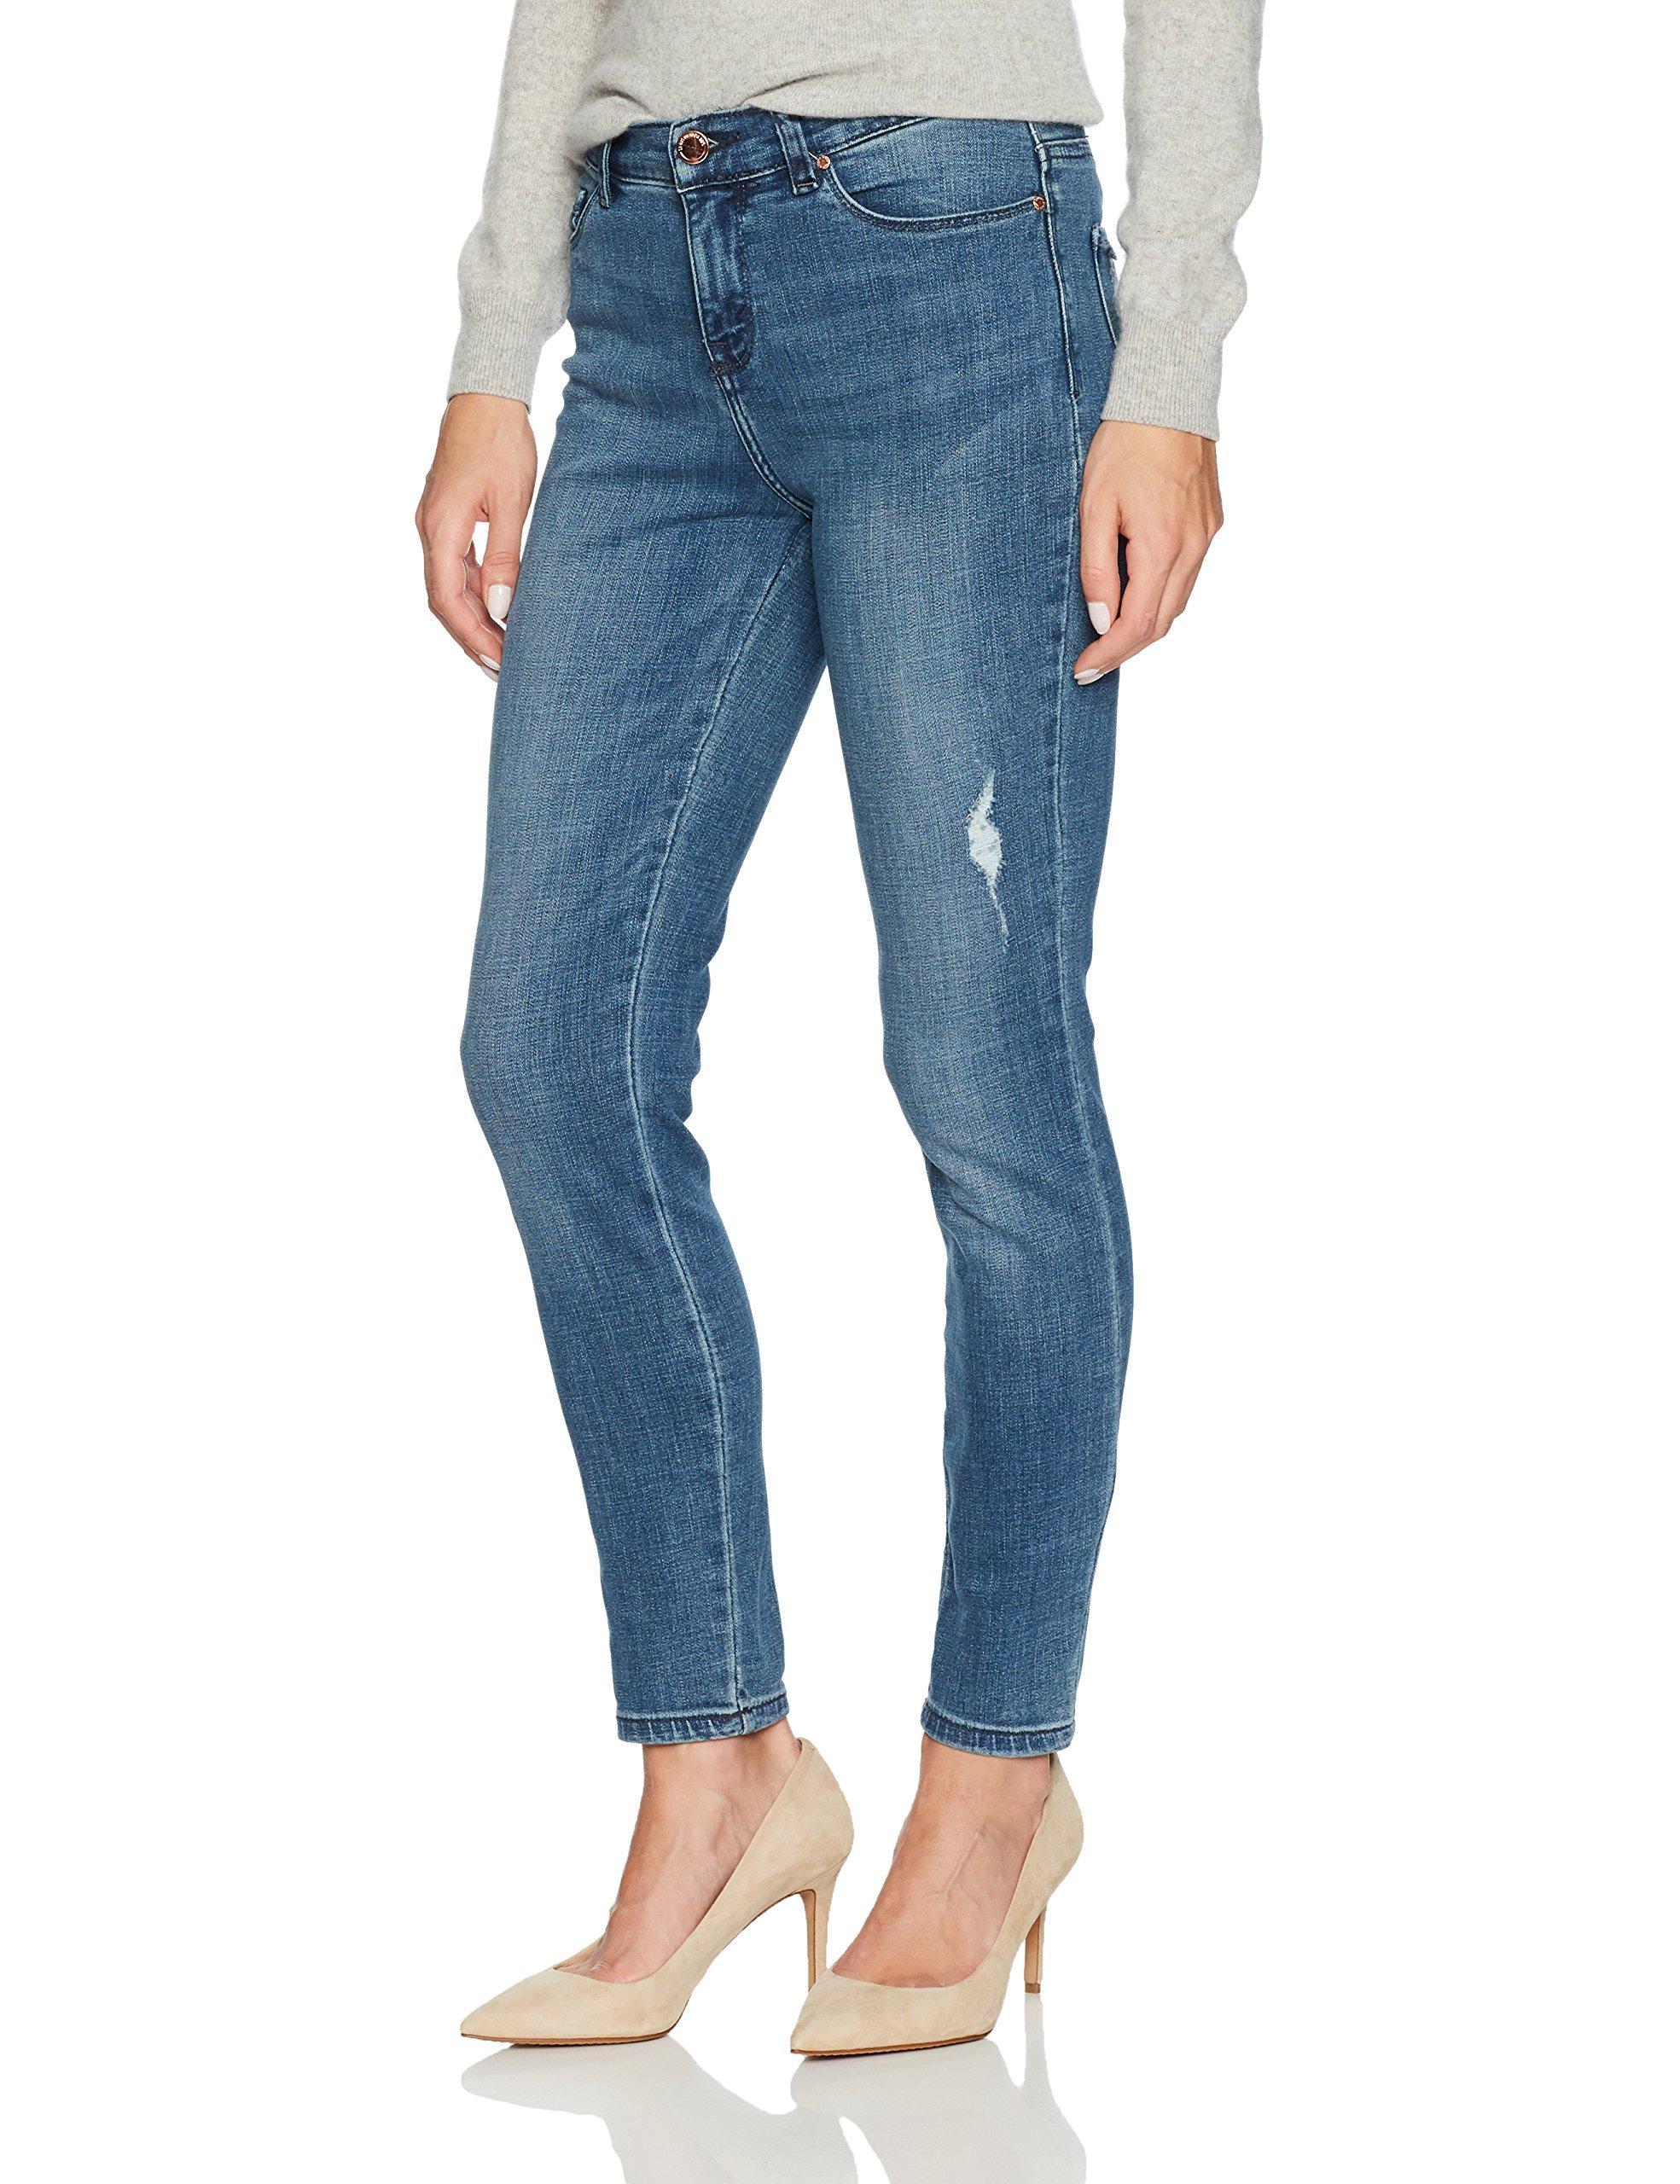 Lee Jeans Modern Series Midrise Fit Anna Skinny Ankle Jean in Blue ...